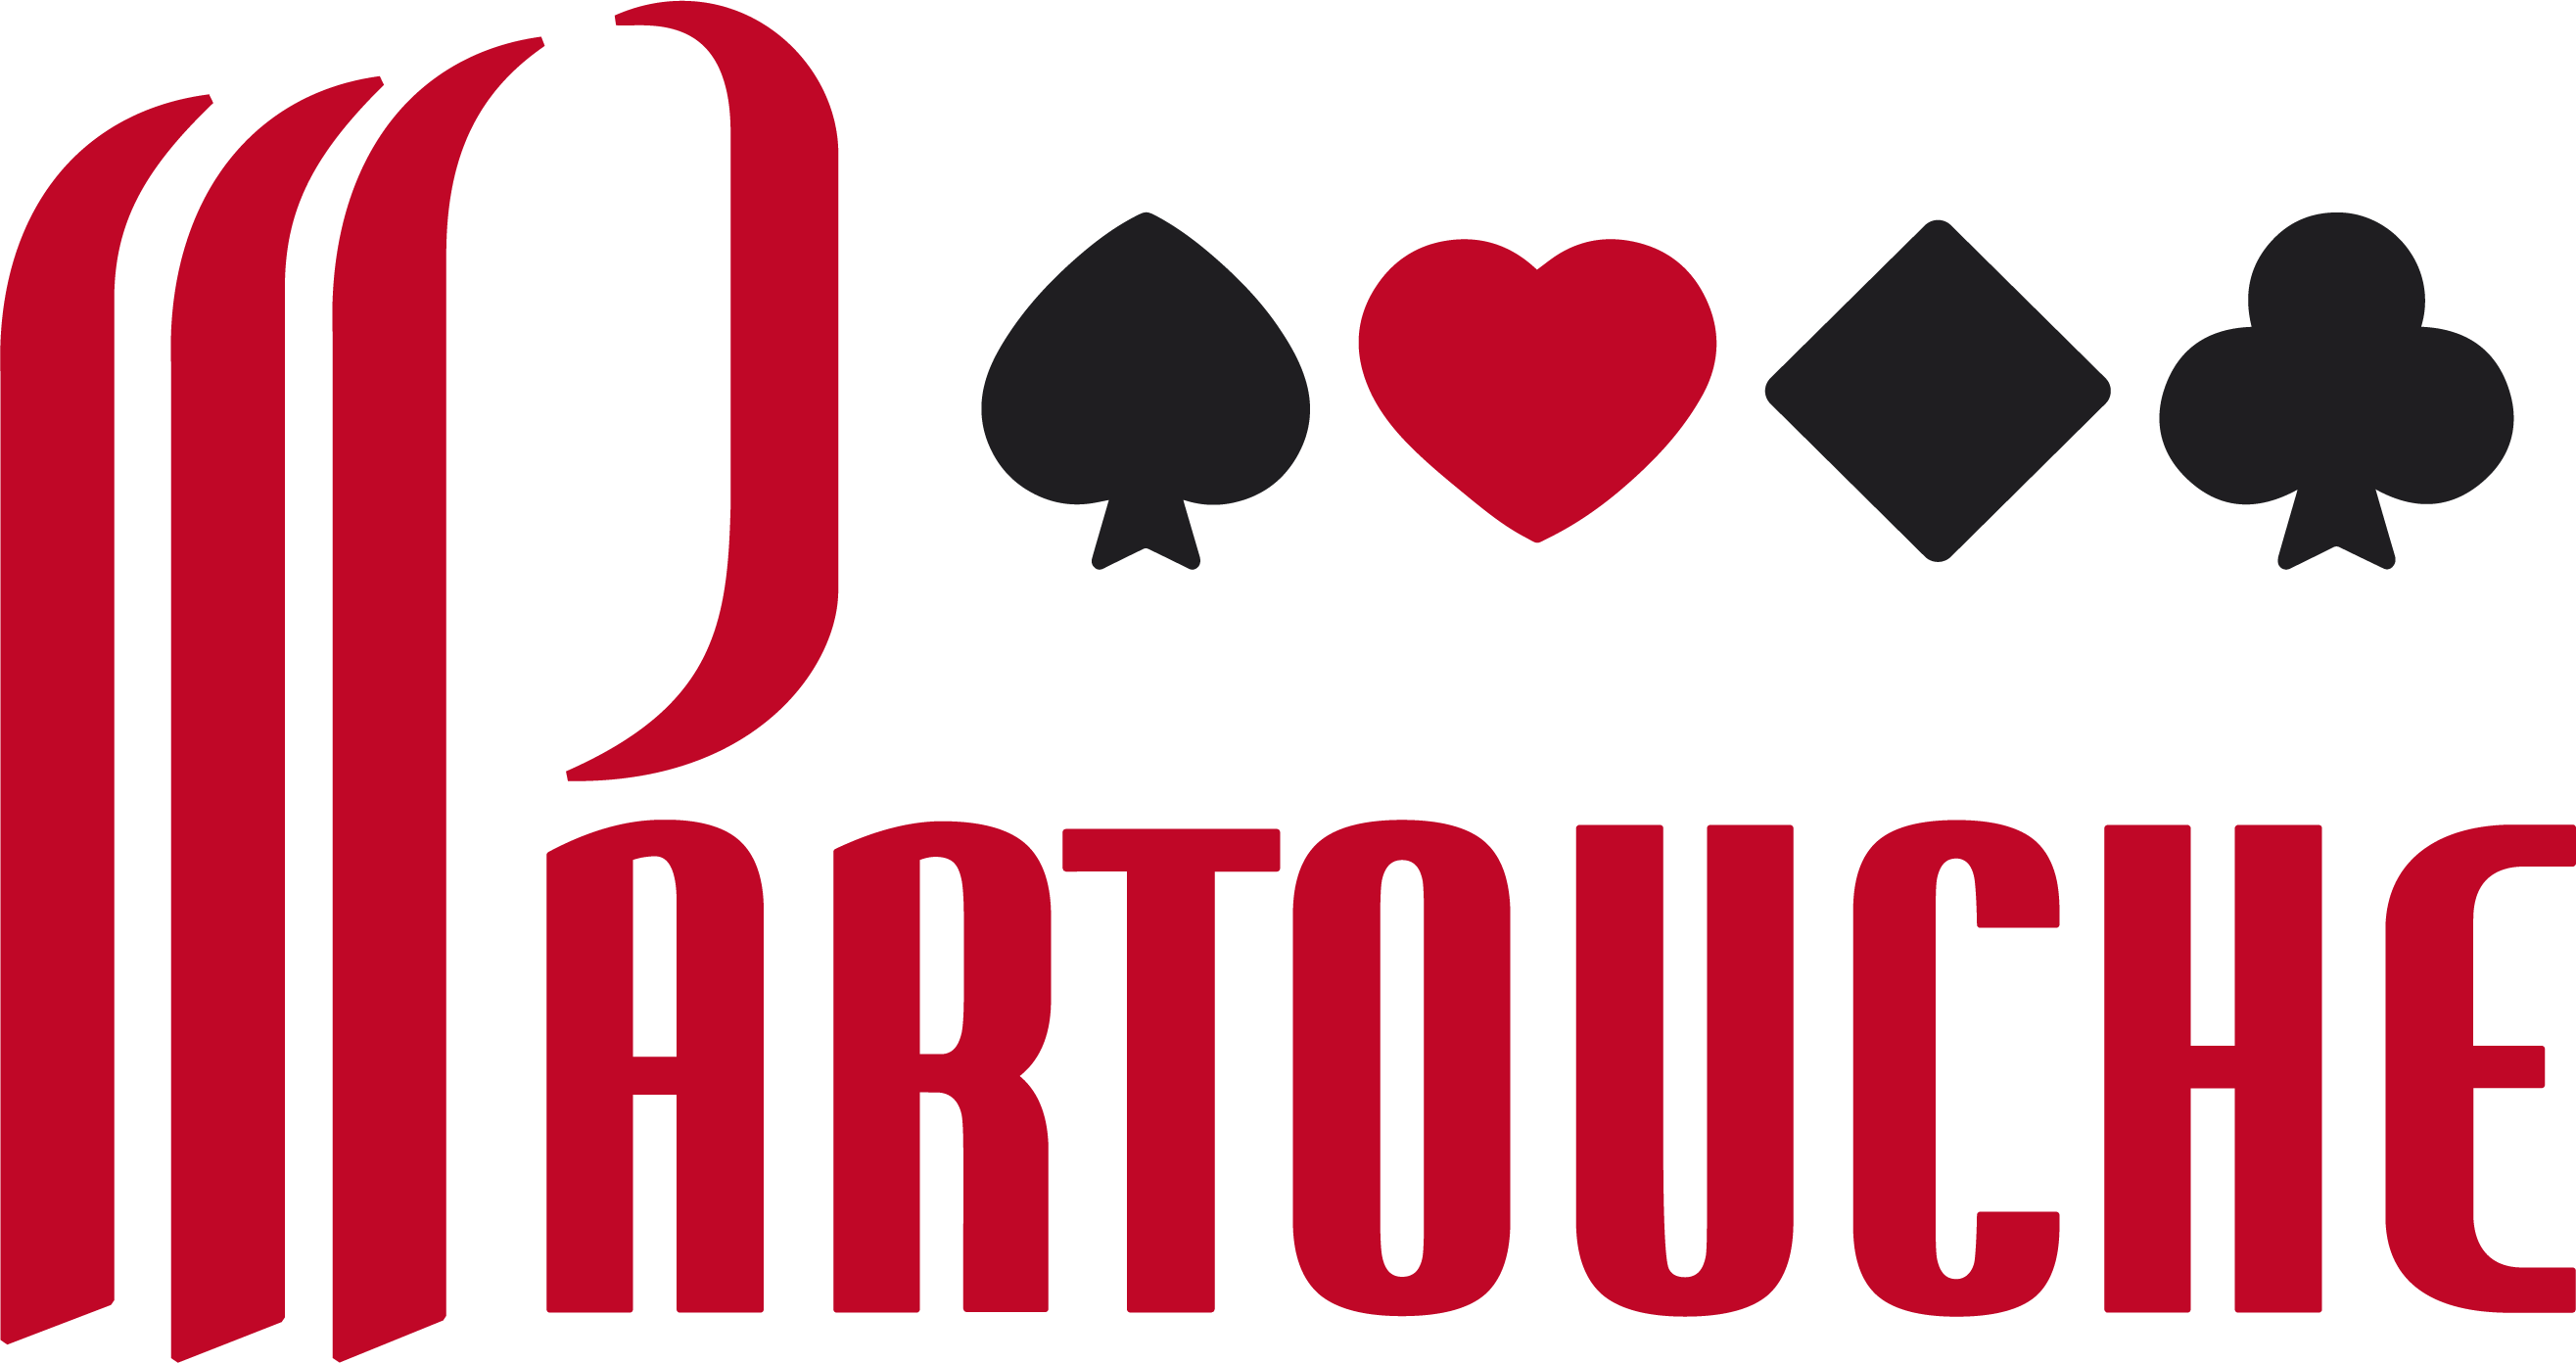 groupe-partouche-and-betsson-ab-announce-partnership-to-launch-online-casino-services-in-belgium